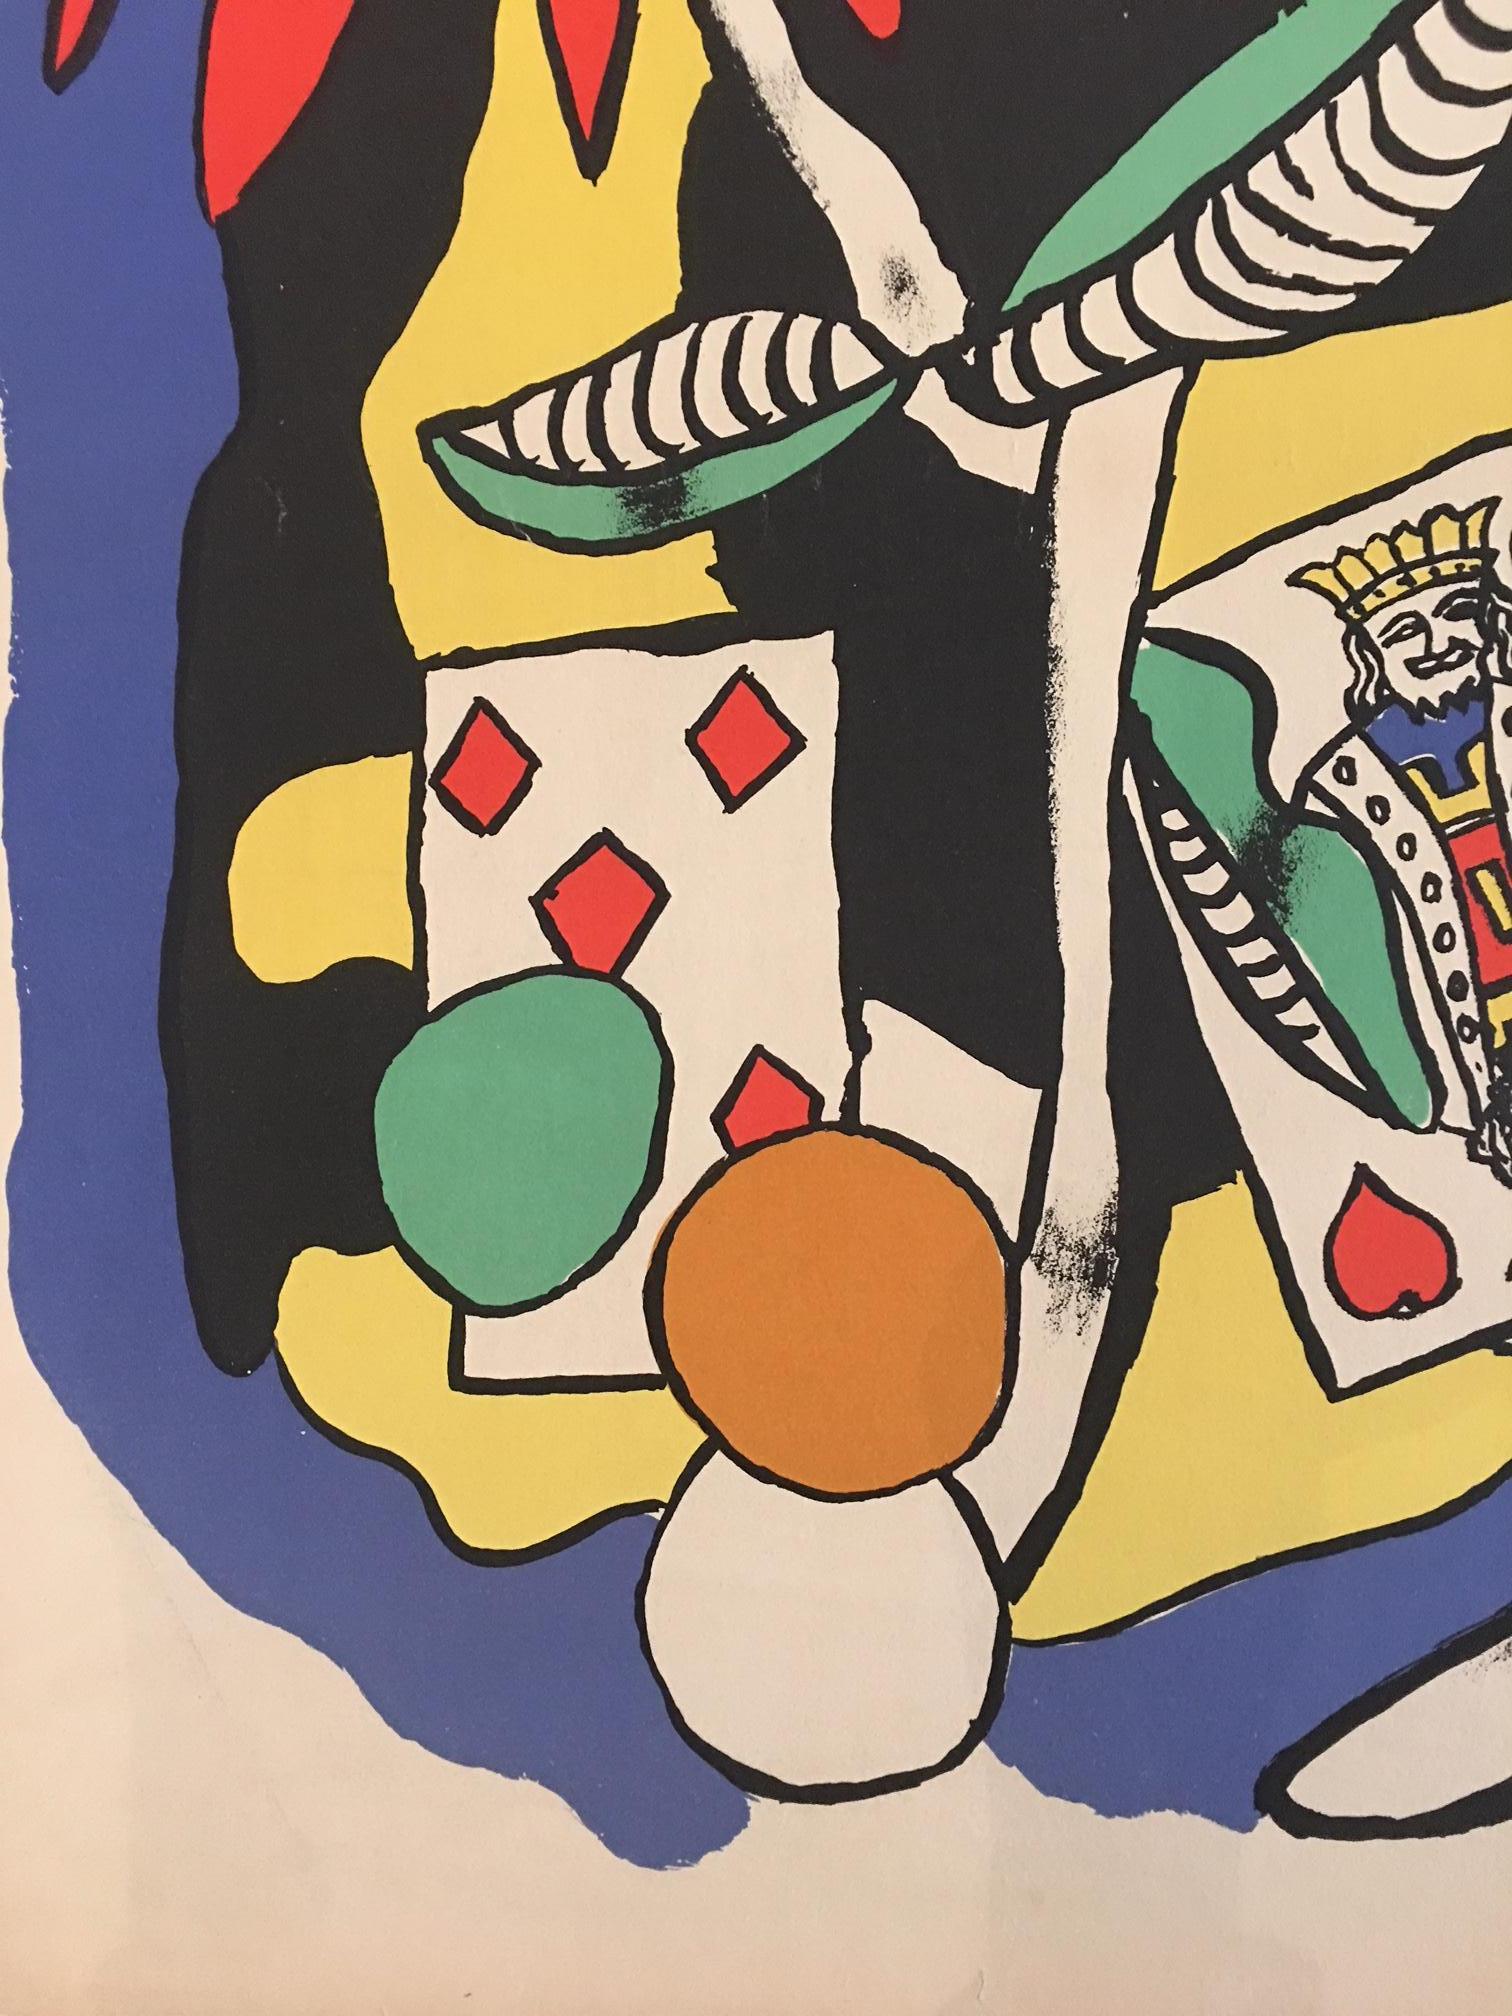 Mid-Century Modern Original Vintage Poster the King of Hearts 1949 Fernand Léger Lithograph Poster